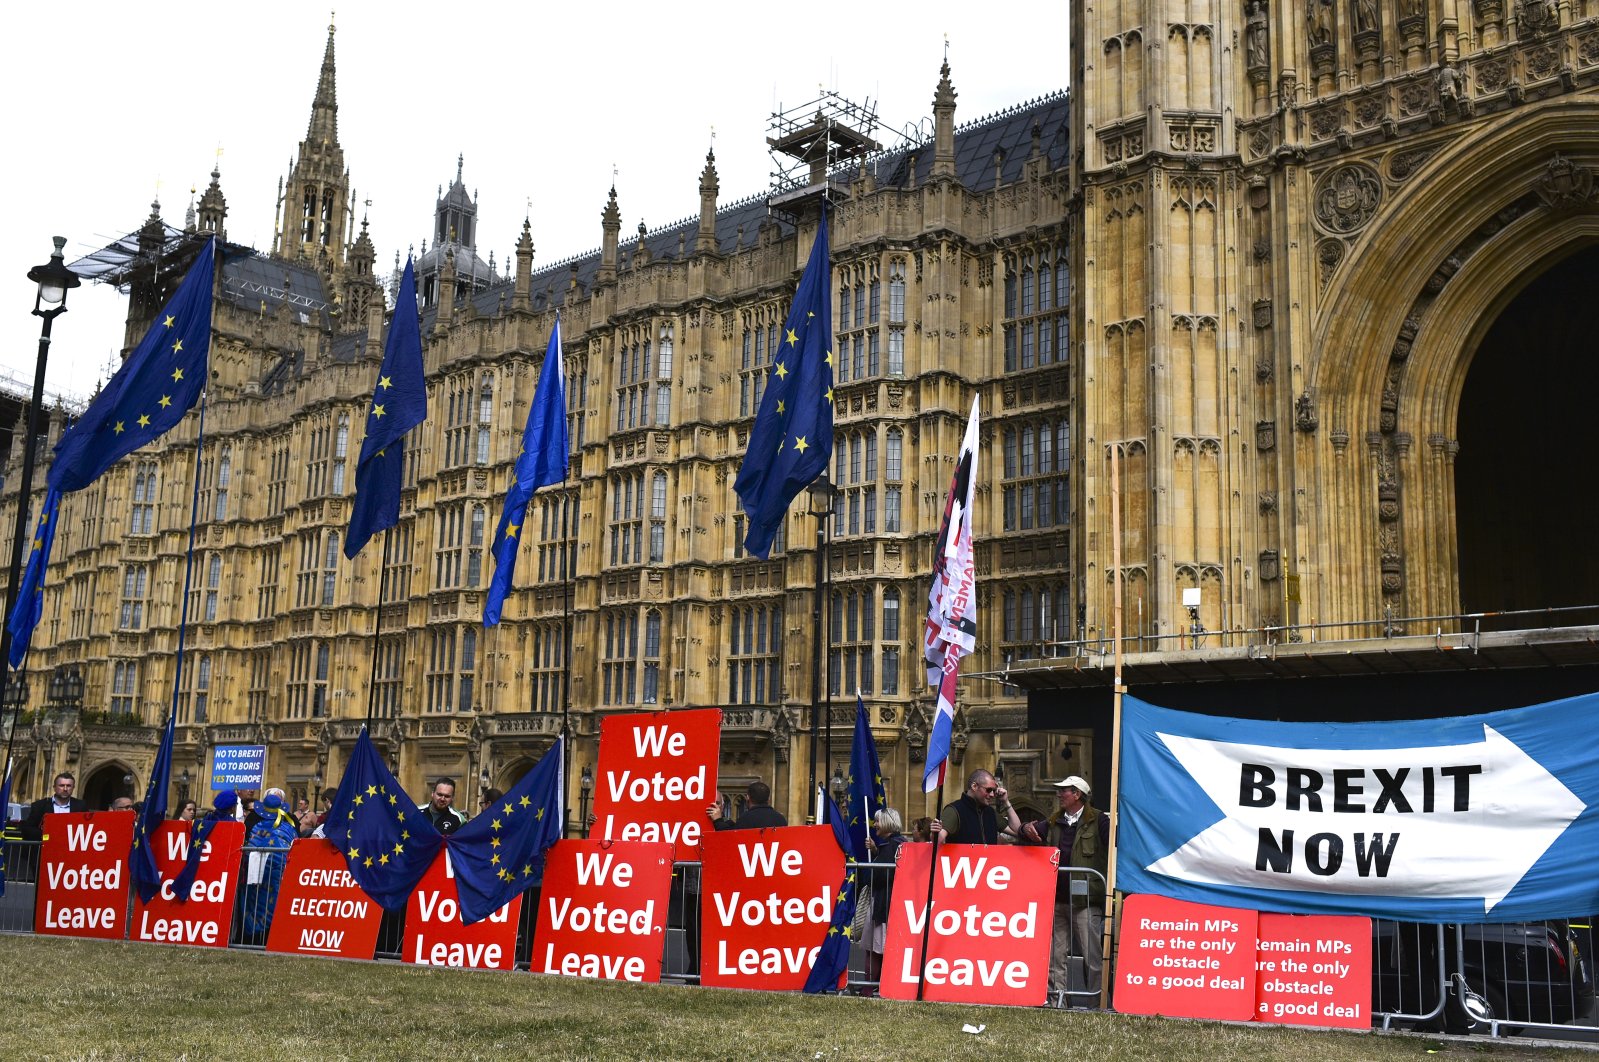 Pro Brexit placards and EU flags are pictured outside the Houses of Parliament, London, Sept. 5, 2019. (AP Photo)